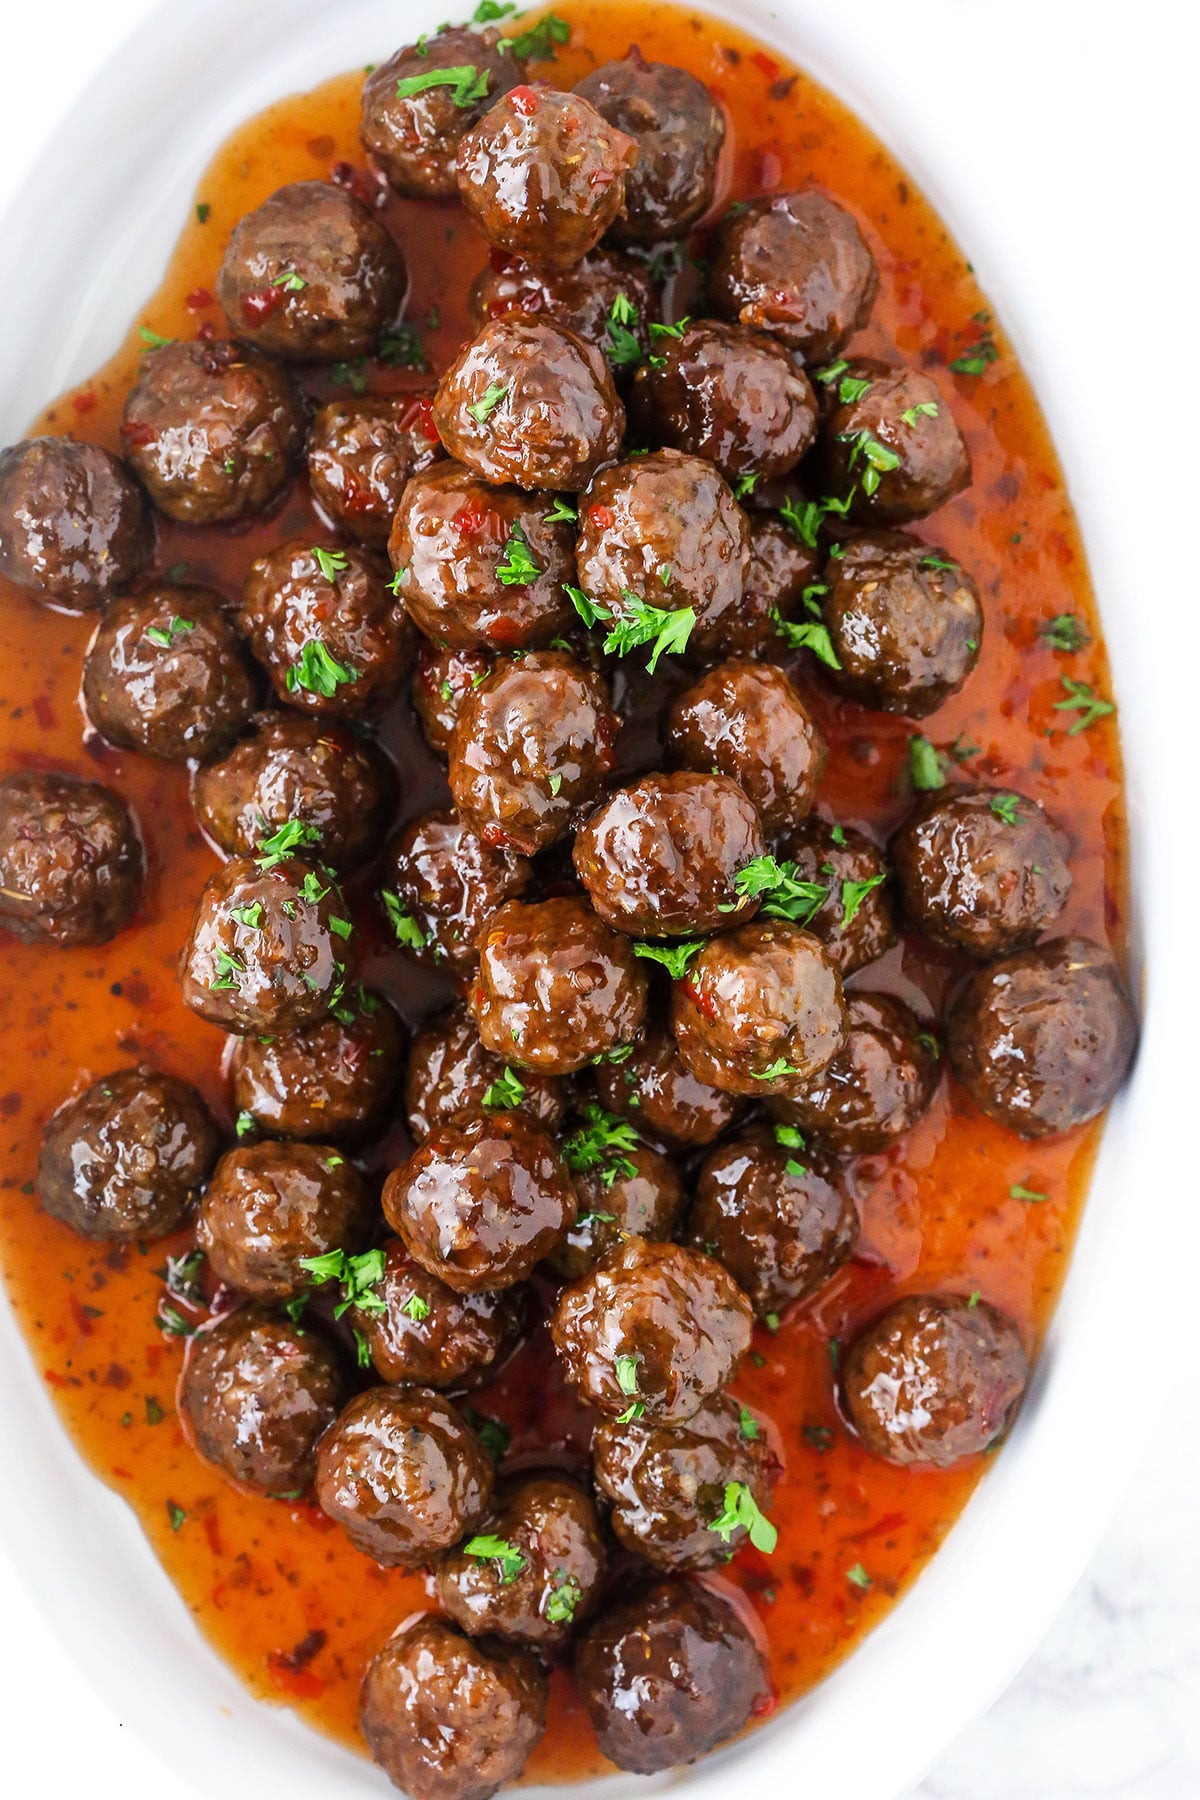 Grape jelly meatballs and sauce in white dish